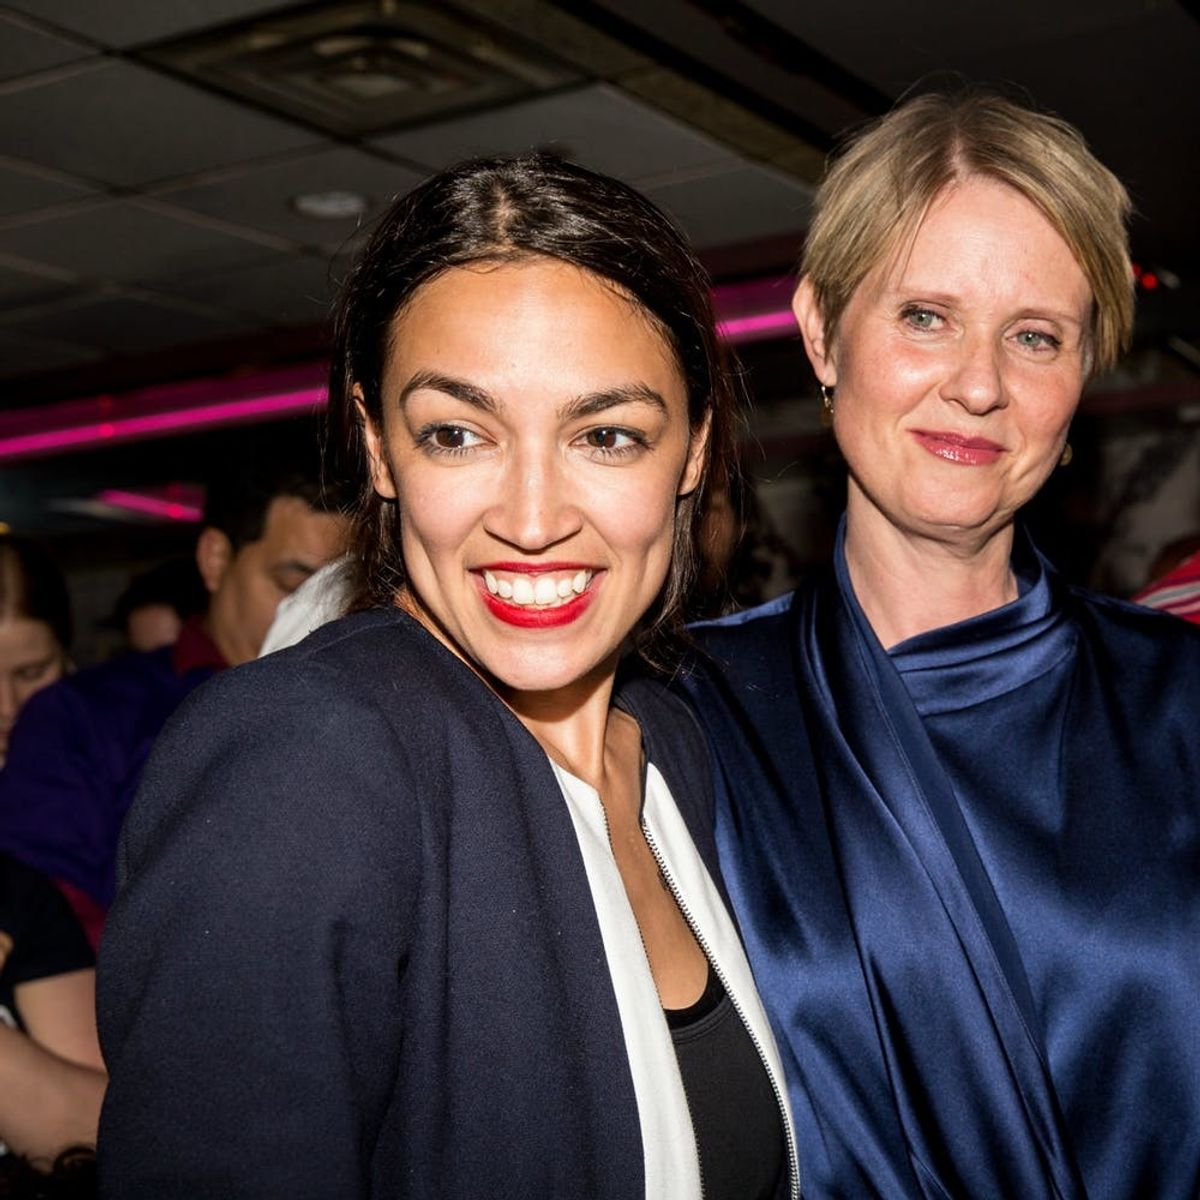 28-Year-Old Alexandria Ocasio-Cortez Has Made History in New York